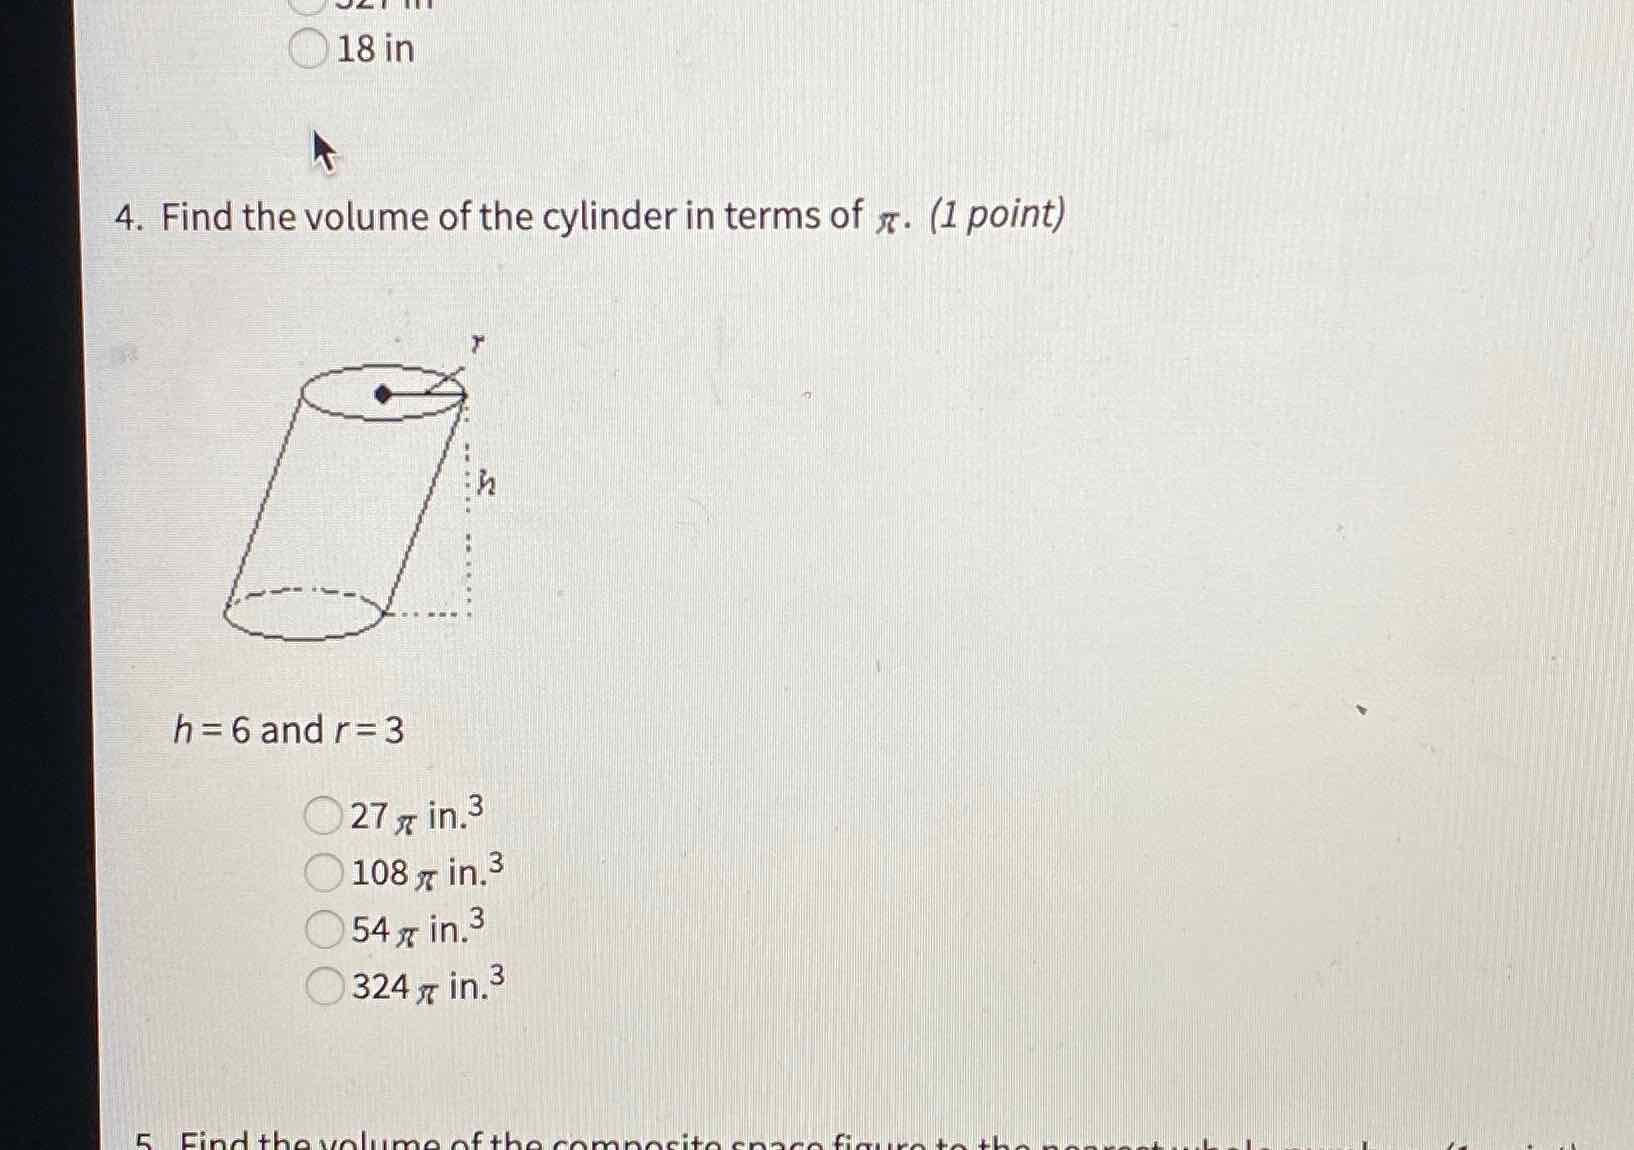 18 in
4. Find the volume of the cylinder in terms of \( \pi \). (1 point)
\( h=6 \) and \( r=3 \)
\( 27 \pi \) in. \( ^{3} \)
\( 108 \pi \) in. \( ^{3} \)
\( 54 \pi \) in. \( ^{3} \)
\( 324 \pi \) in. \( ^{3} \)